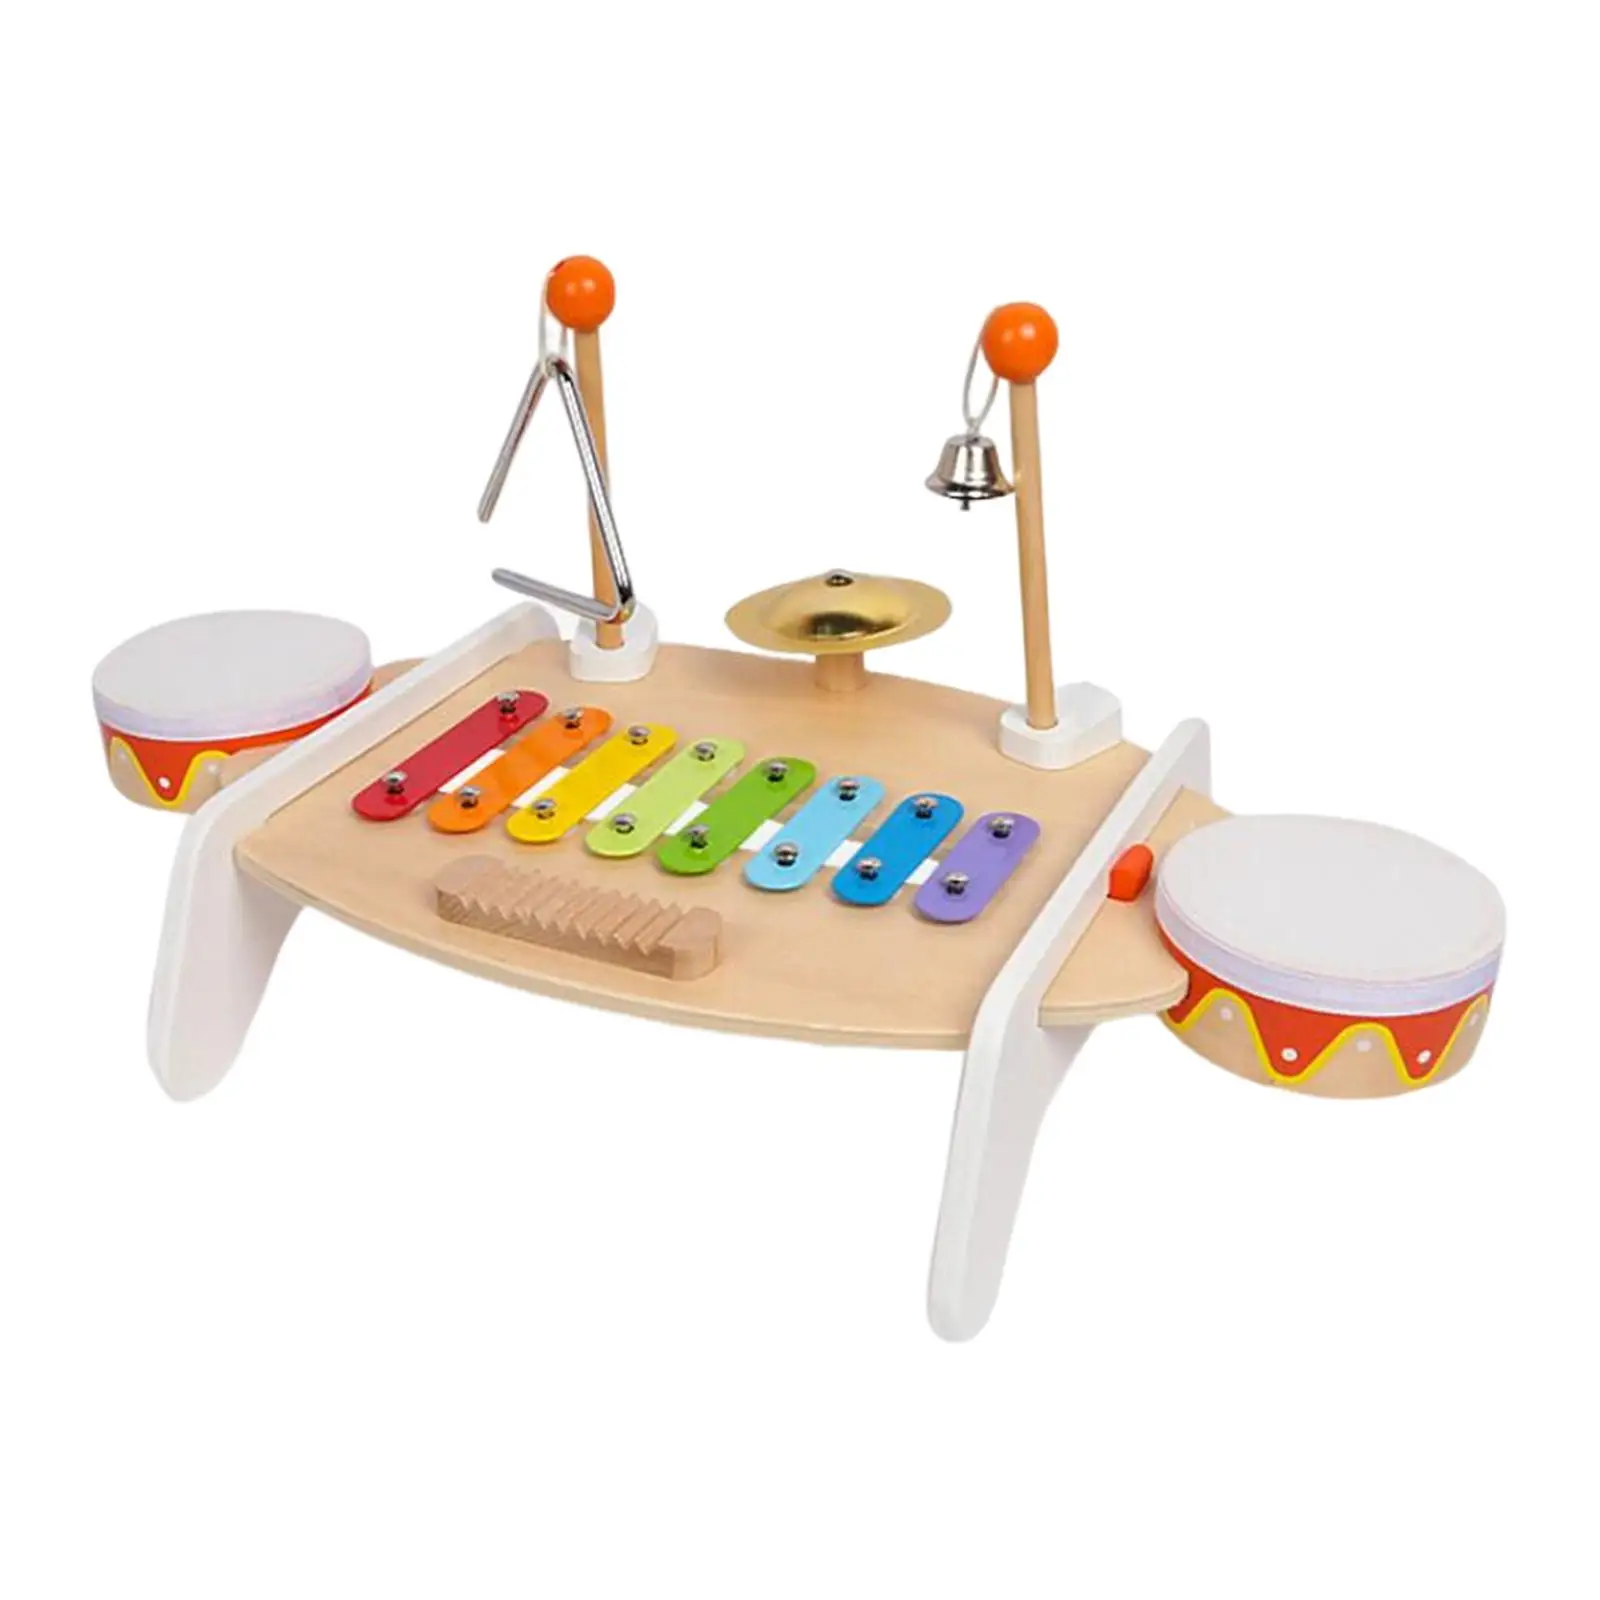 Portable Xylophone Toy Montessori Toy Wooden Percussion Toy for Children Boys Birthday Gift